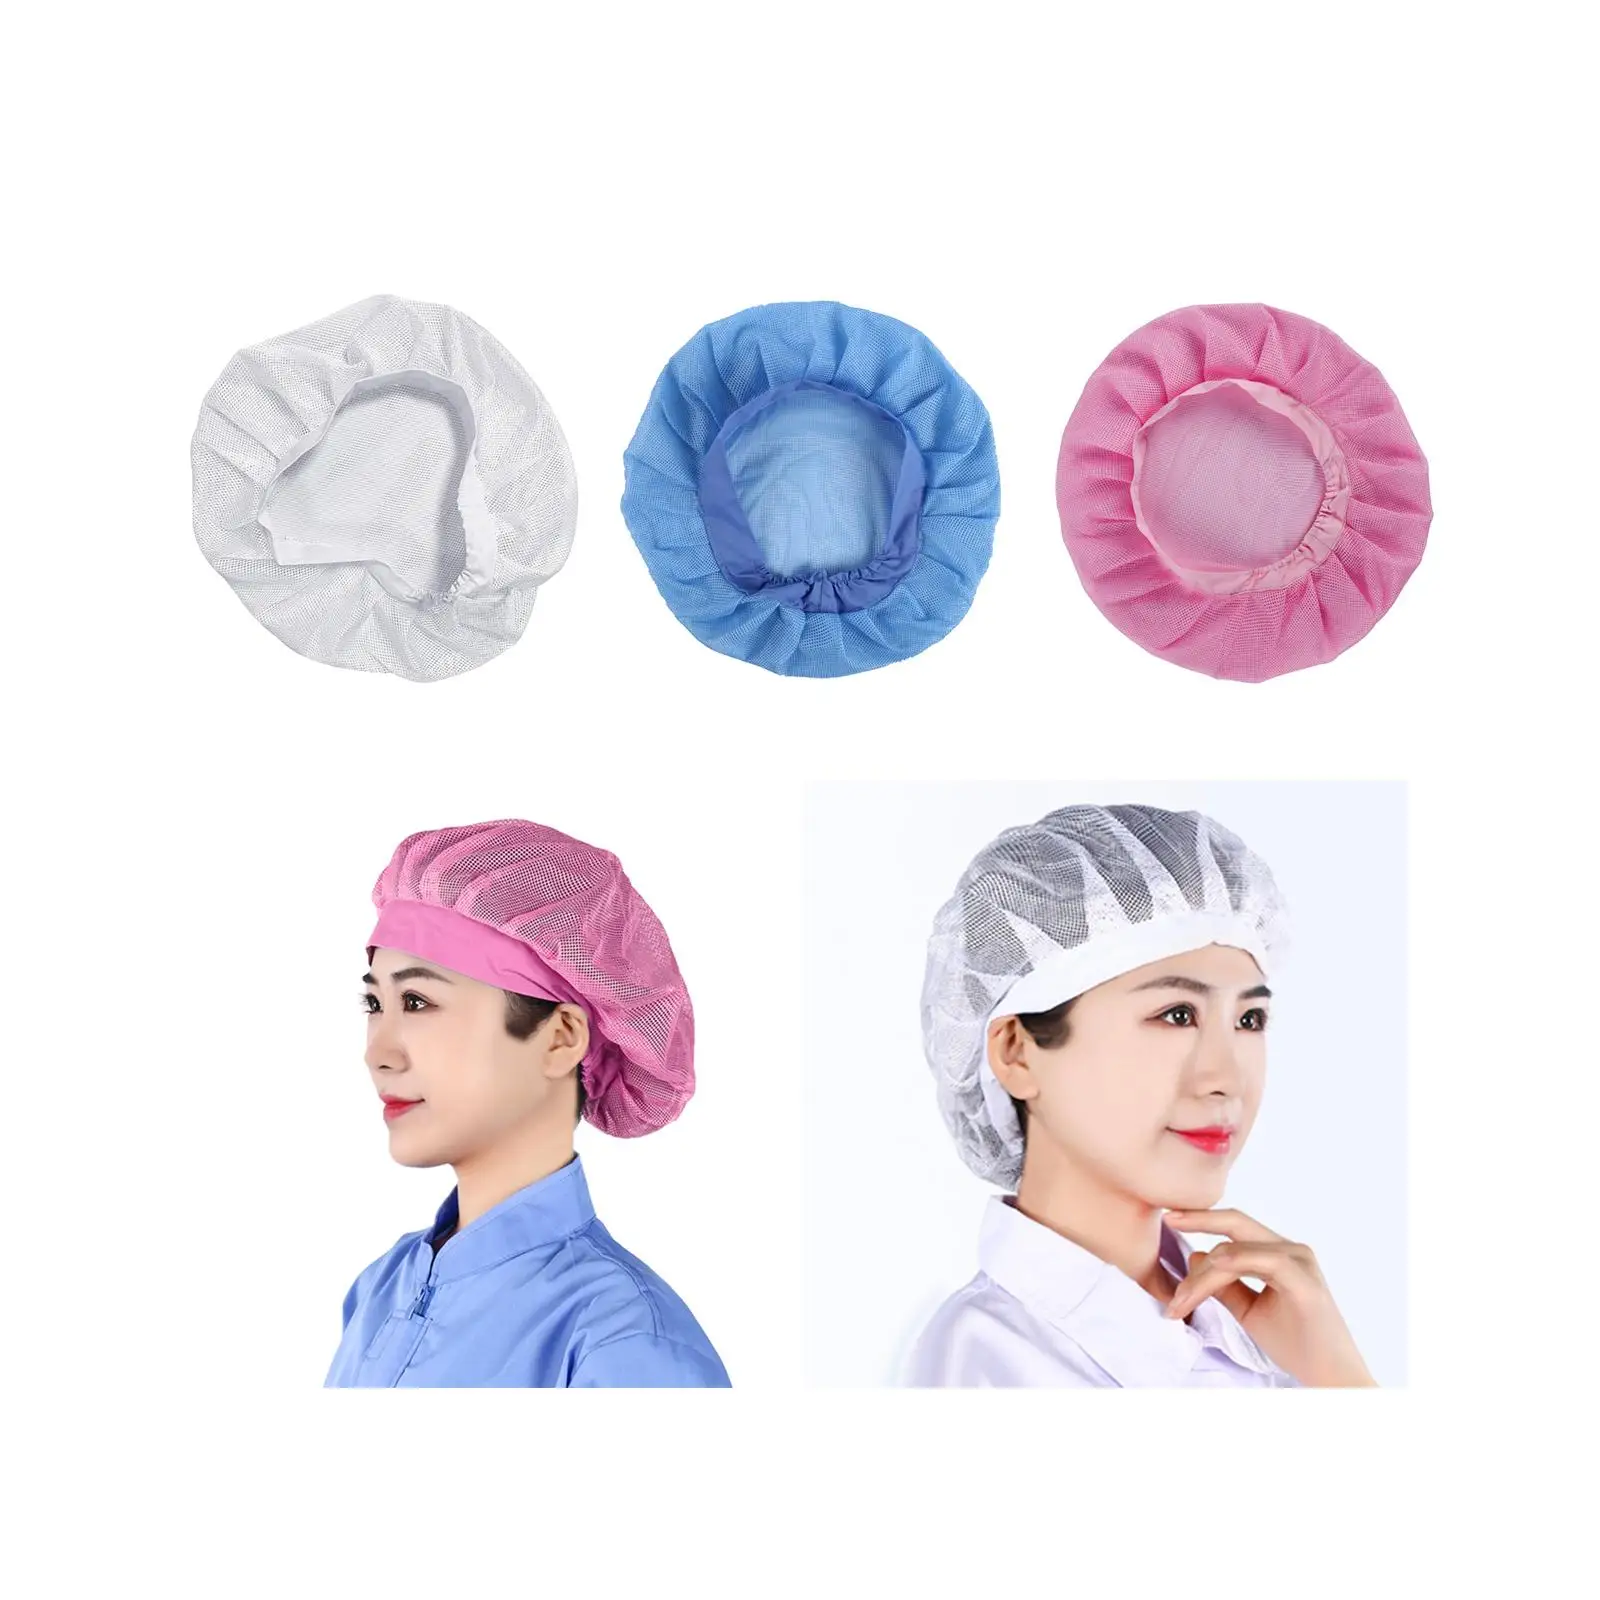 Chef Cap Elastic Lightweight Mesh Work Cap for Catering Waitress Dining Hall